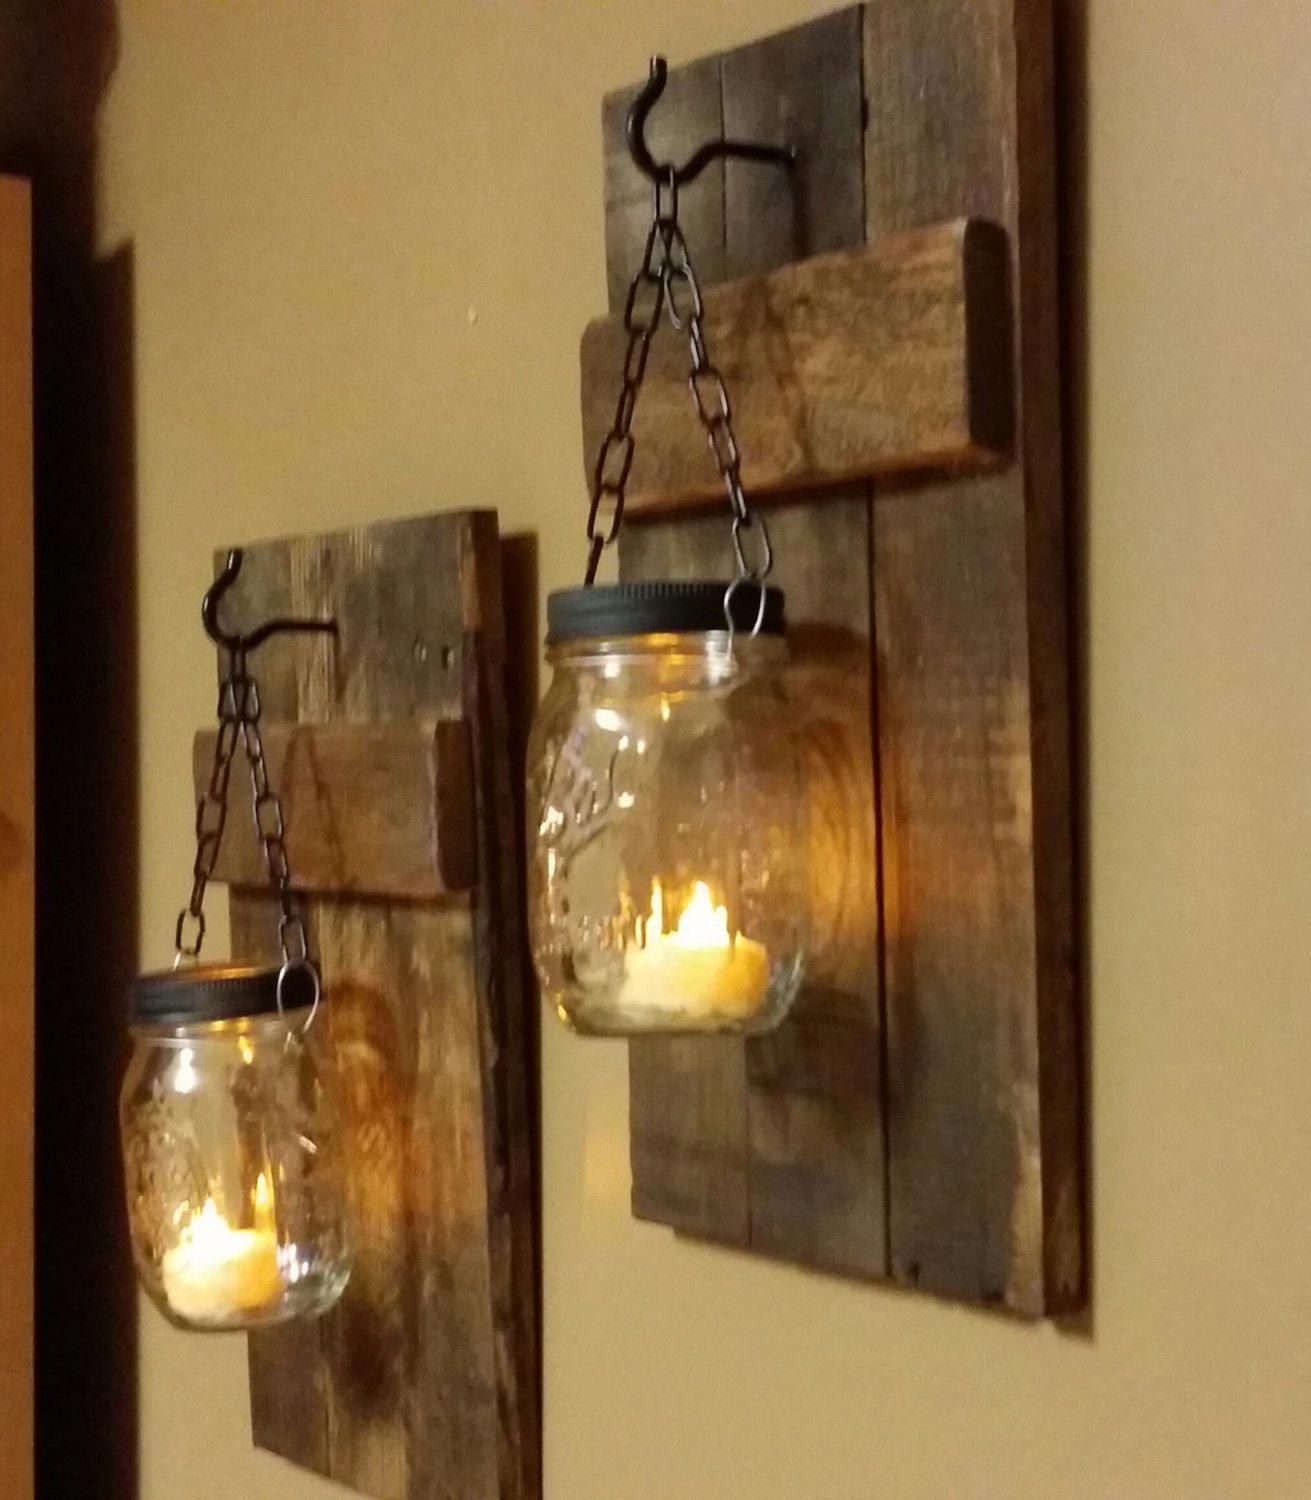 Rustic  Home  Decor Rustic Candle sconce Home and Living | Etsy - Rustic  Home  Decor Rustic Candle sconce Home and Living | Etsy -   19 diy Wood decor ideas